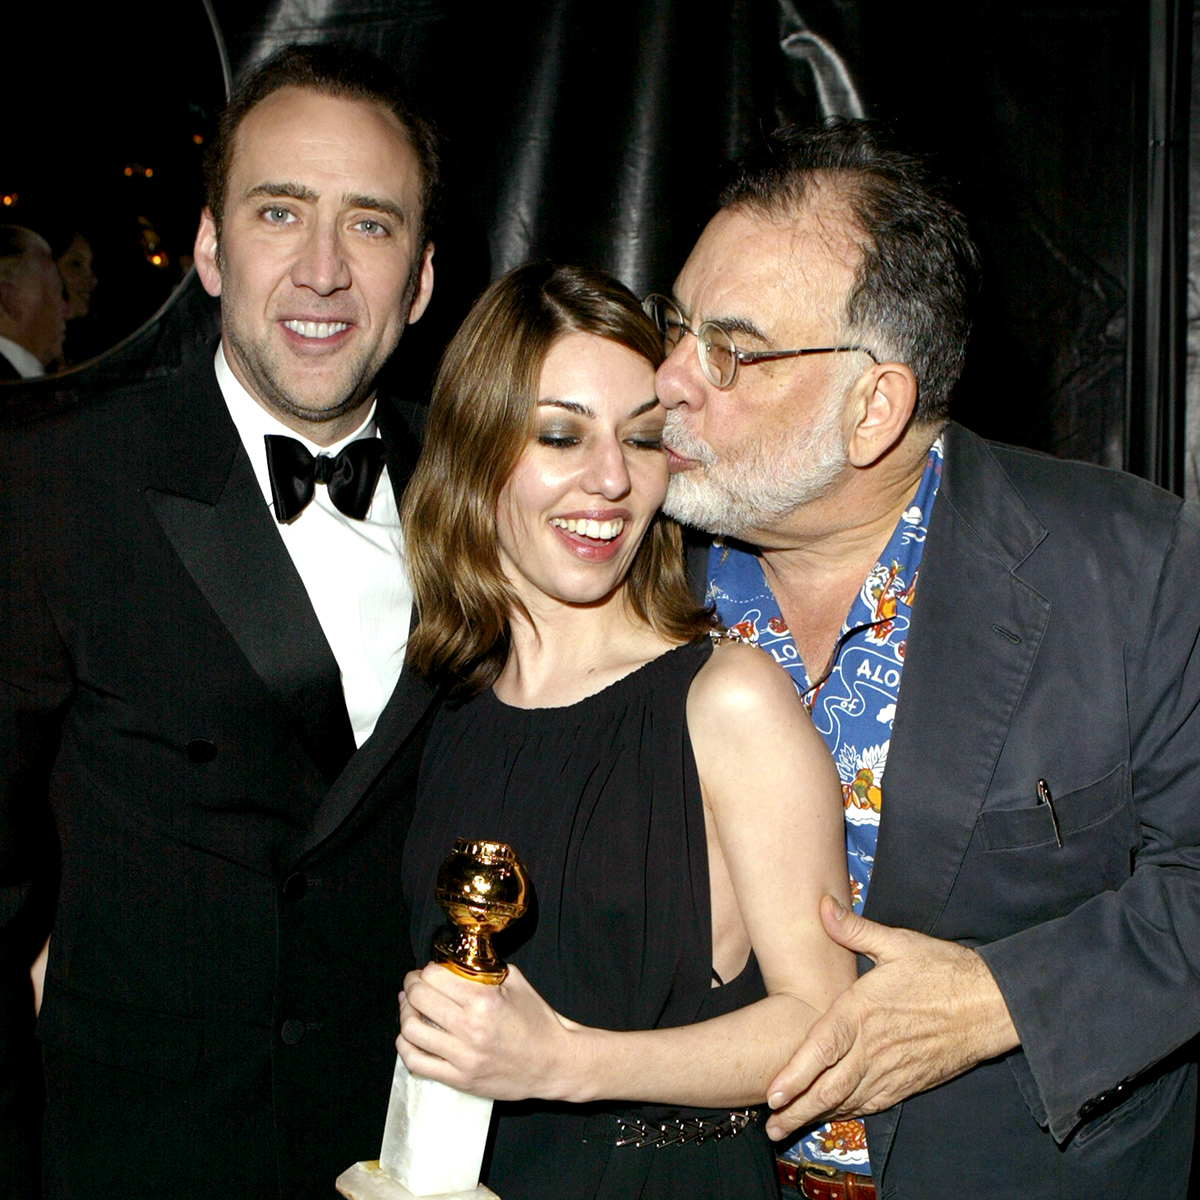 Francis Ford Coppola Is Still Going for Broke